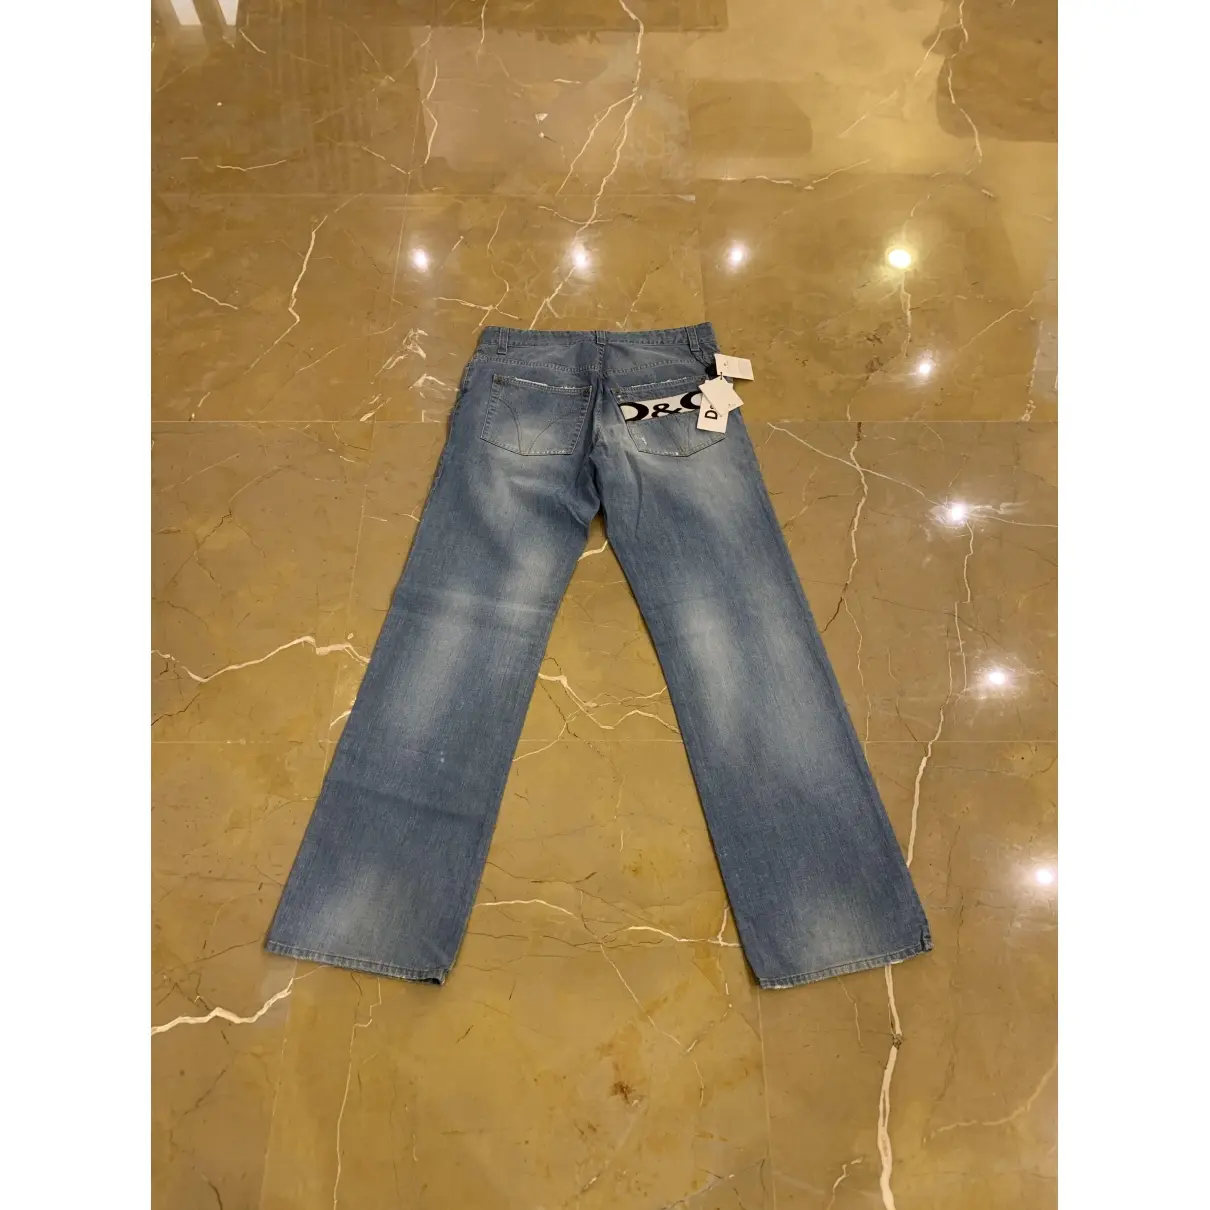 D&G Jeans for sale